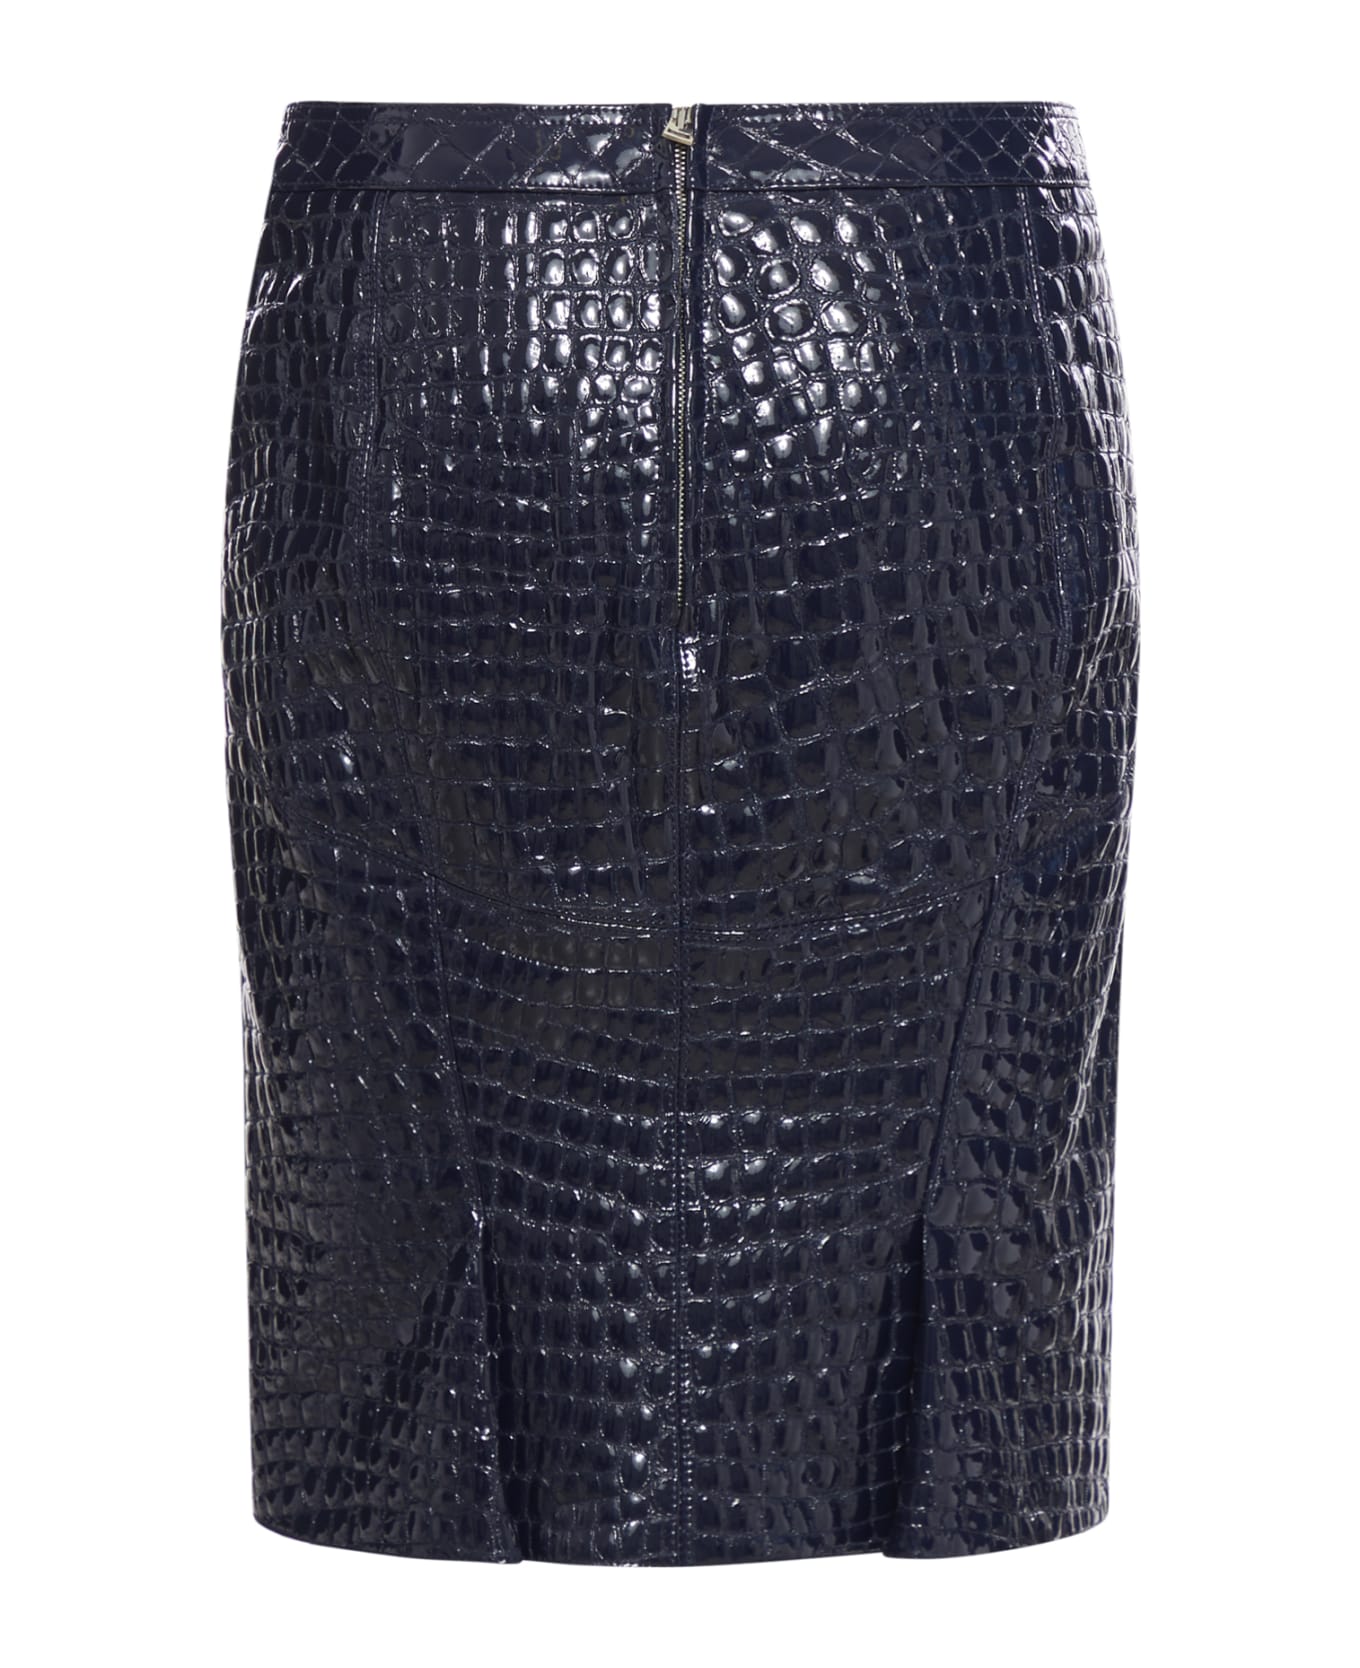 Tom Ford Glossy Croco Embossed Goat Leather Skirt - Deep Blue